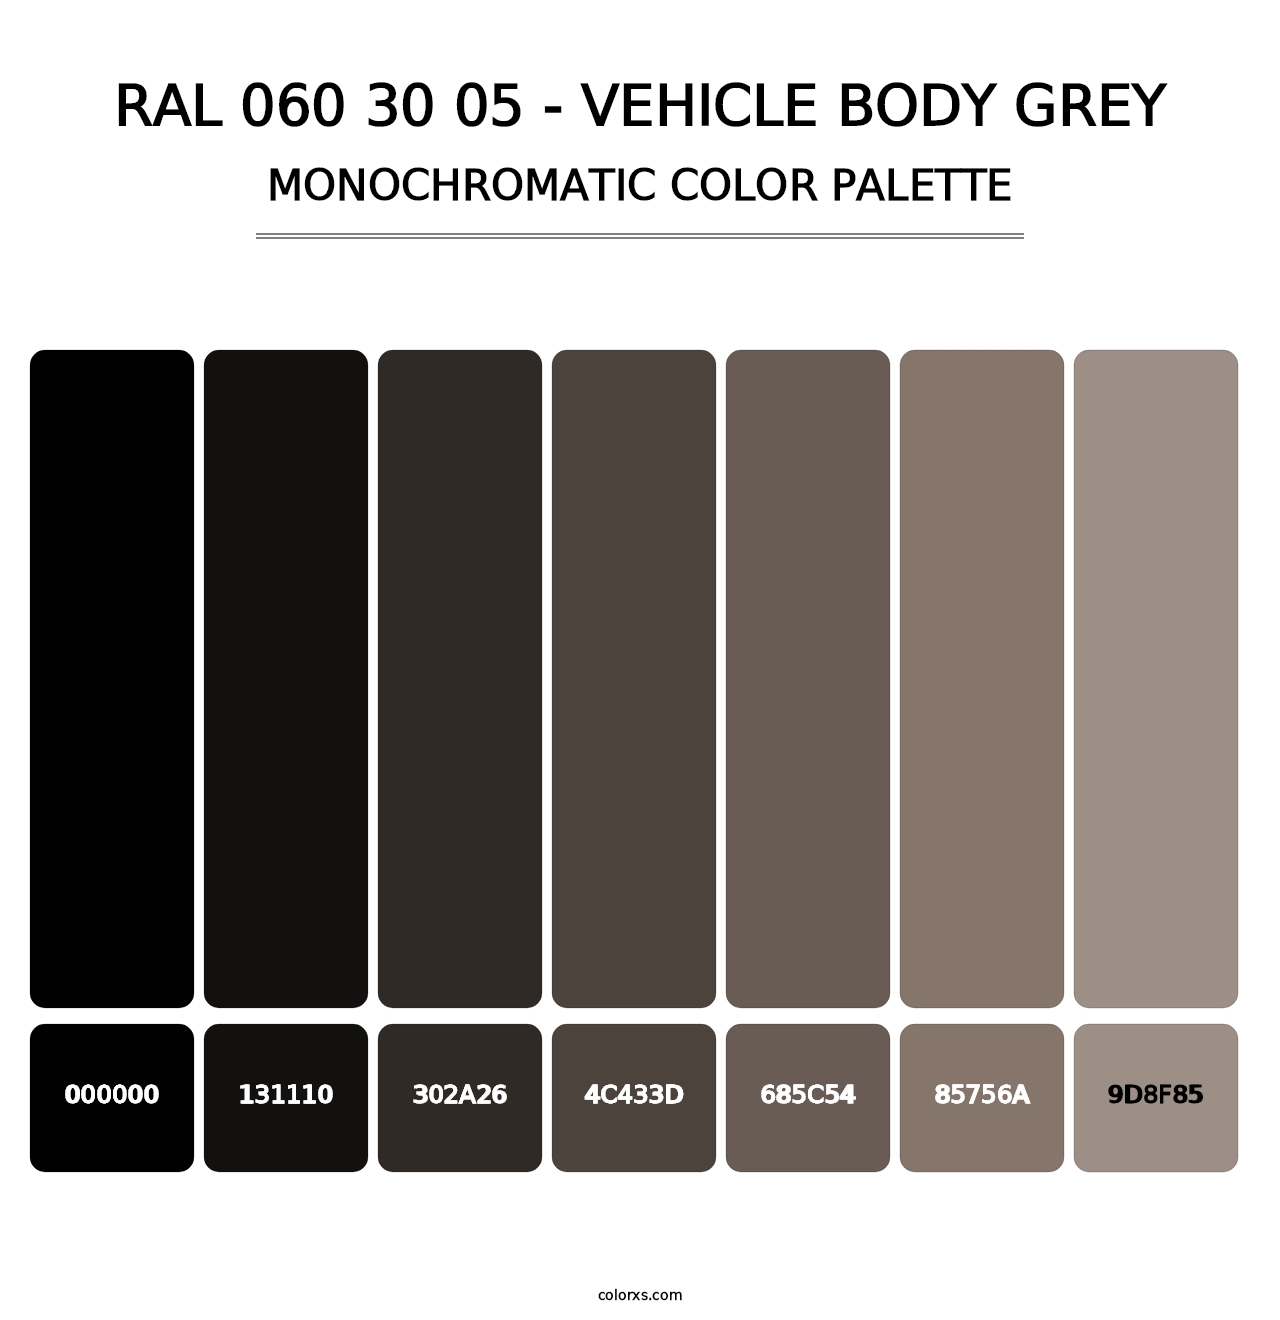 RAL 060 30 05 - Vehicle Body Grey - Monochromatic Color Palette